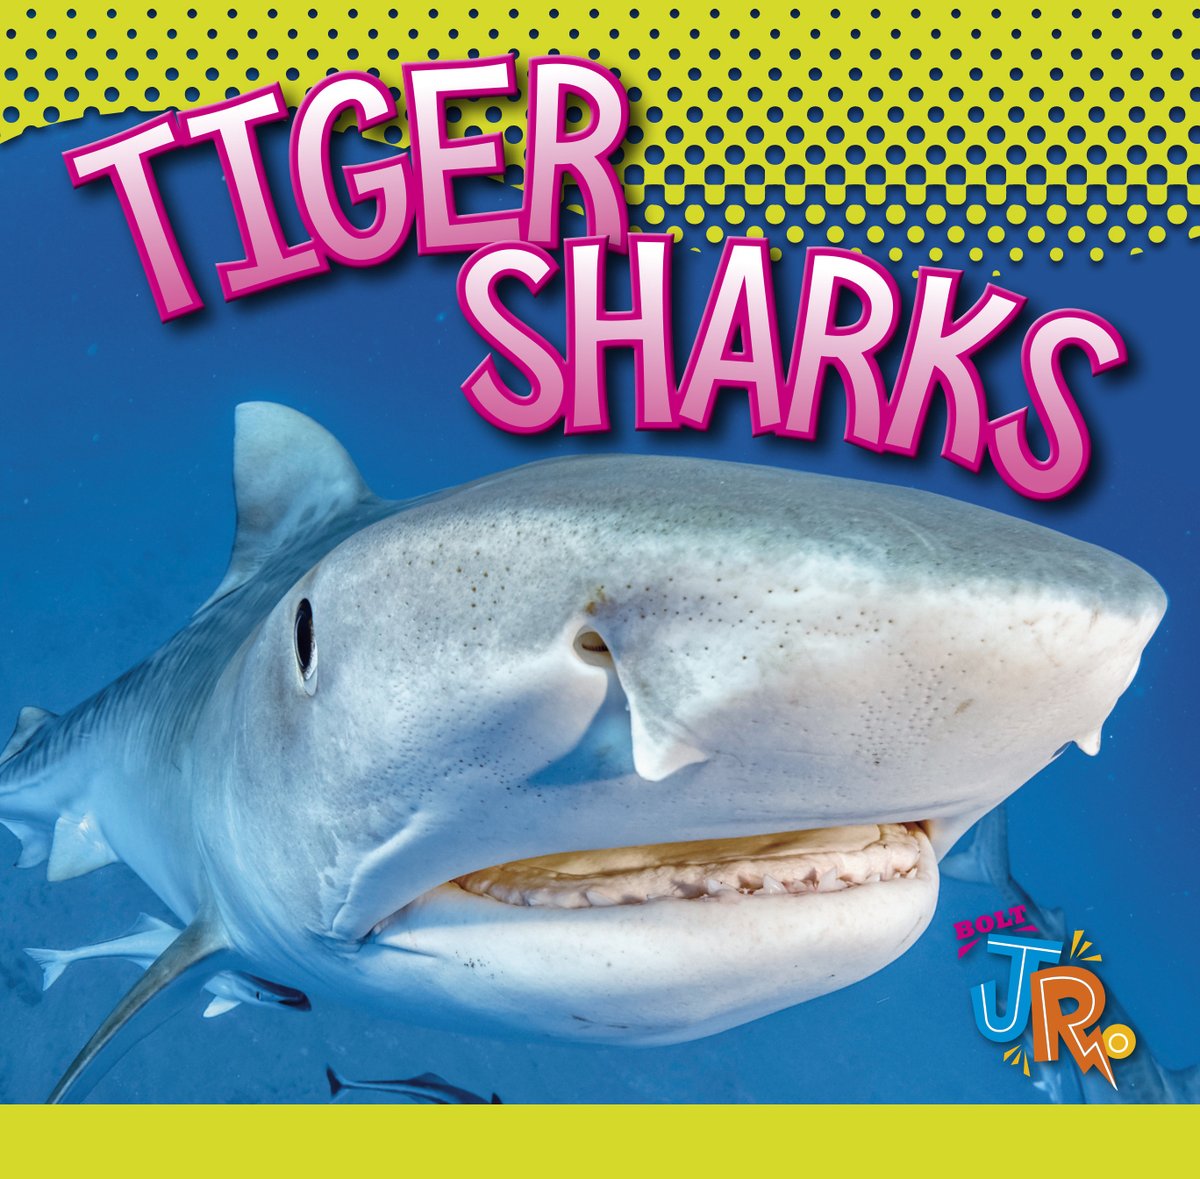 Dive into the ocean's depths and learn about the fearsome predators readers love. World of Sharks introduces the habitats, life cycles, and behaviors of these incredible animals. This new series is also available in #Spanish!

#newbooks #sharks #BlackRabbitBooks